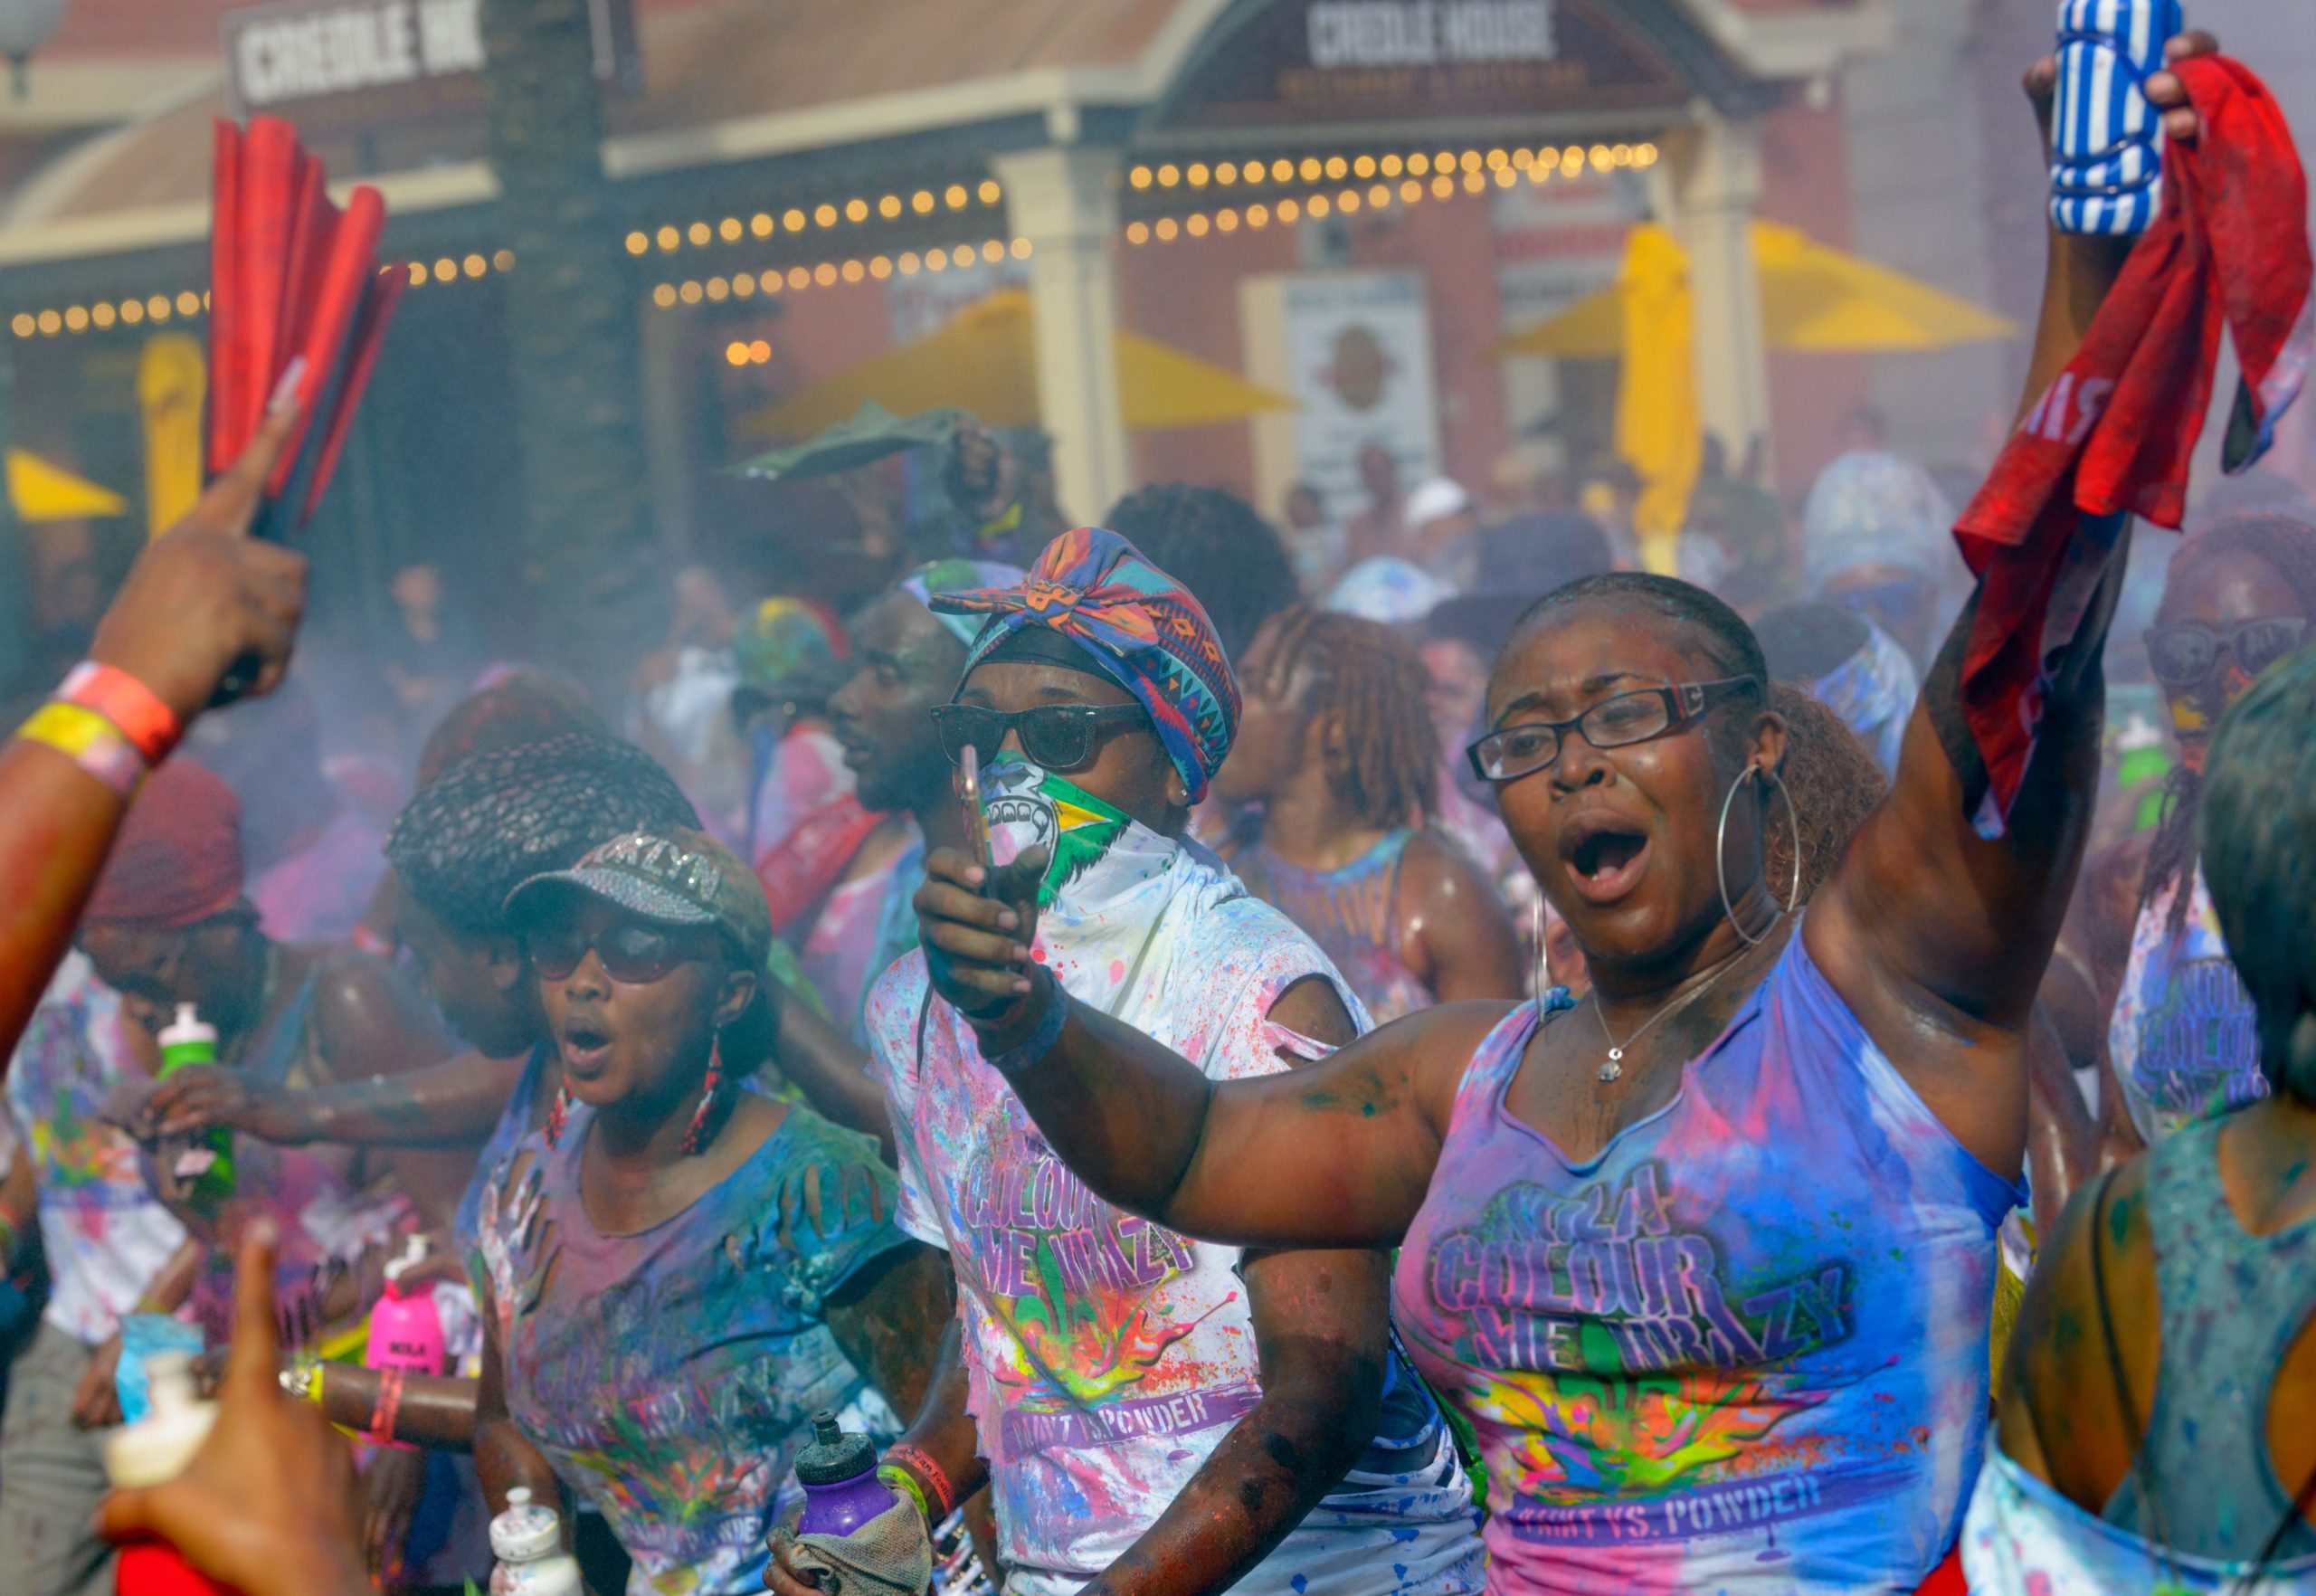 Participants in the NOLA Caribbean Festival take part in the Colour Me Krazy Carnival Parade down Canal Street in New Orleans, La. Saturday, June 22, 2019. The group's website states 'the NOLA Caribbean Festival celebrates Caribbean cuisine, music, dance, and culture while highlighting New Orleans' deeply-rooted connections as the Caribbean's northern-most city.' Photo by Matthew Hinton